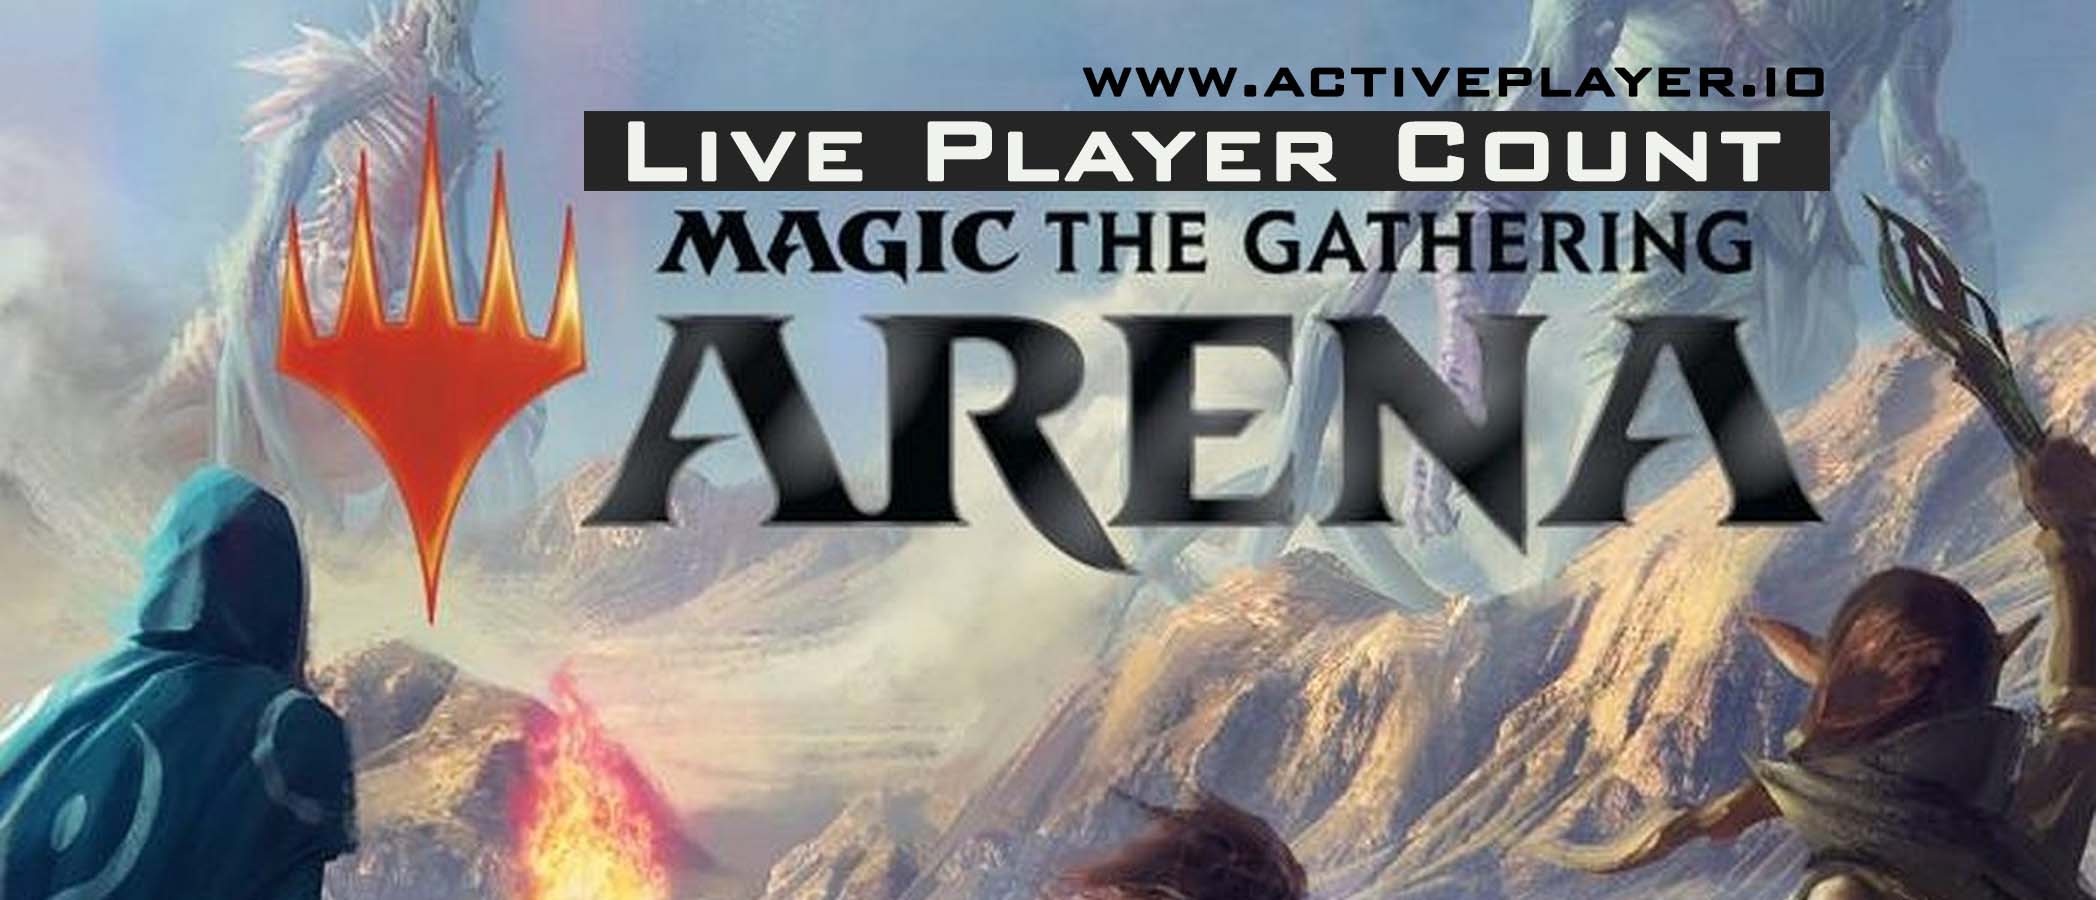 MTG Online vs. Arena: Which Is Right For You?